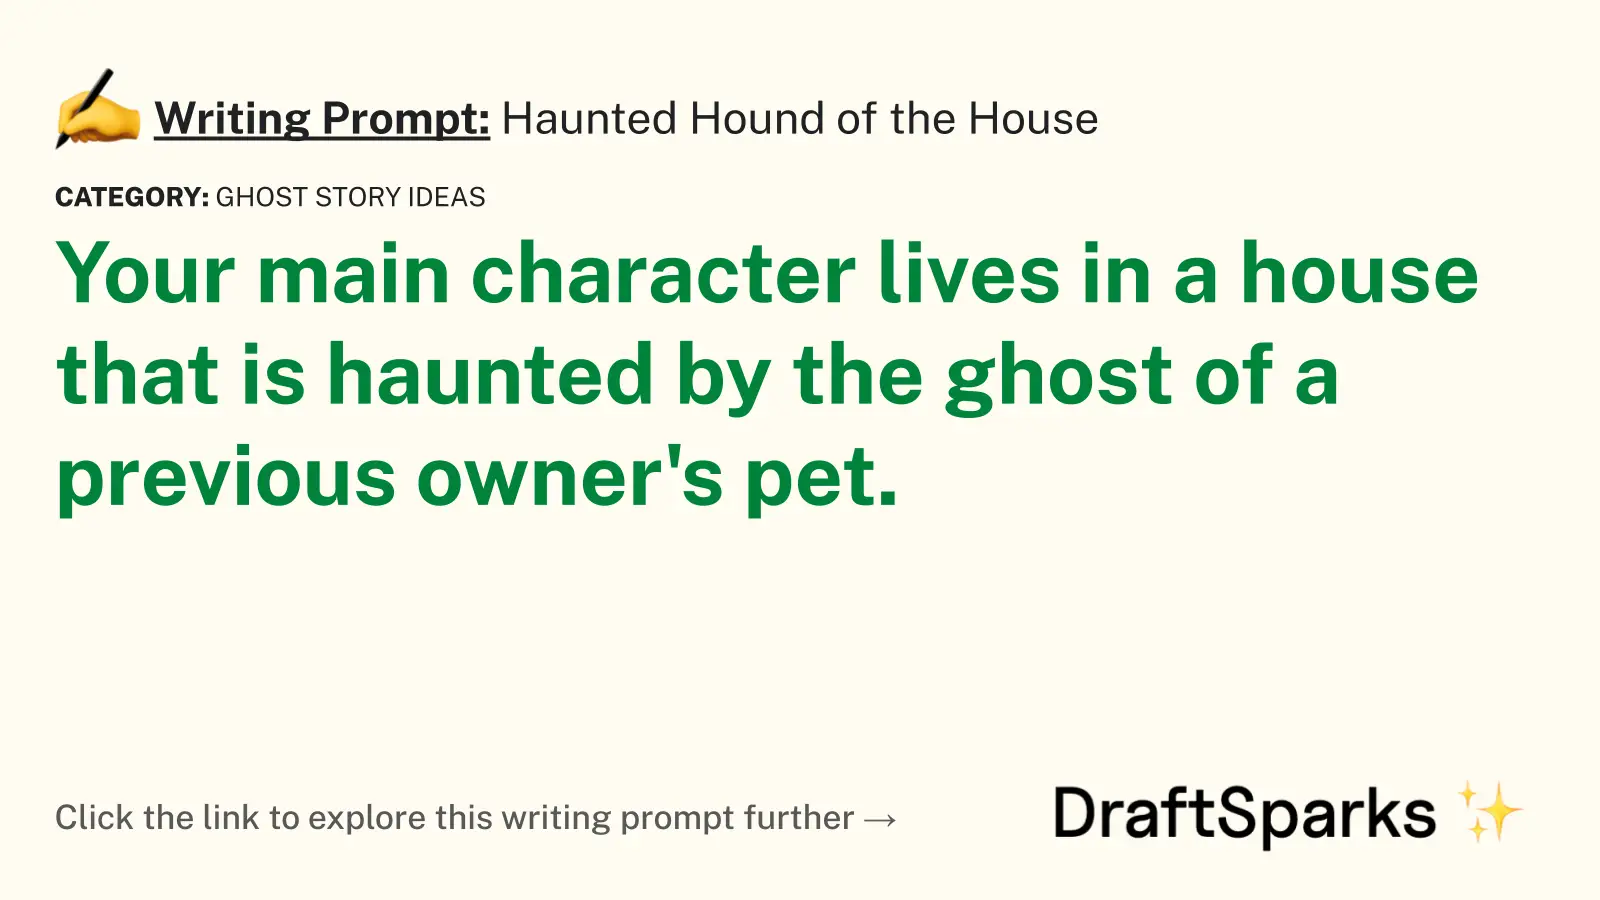 Haunted Hound of the House